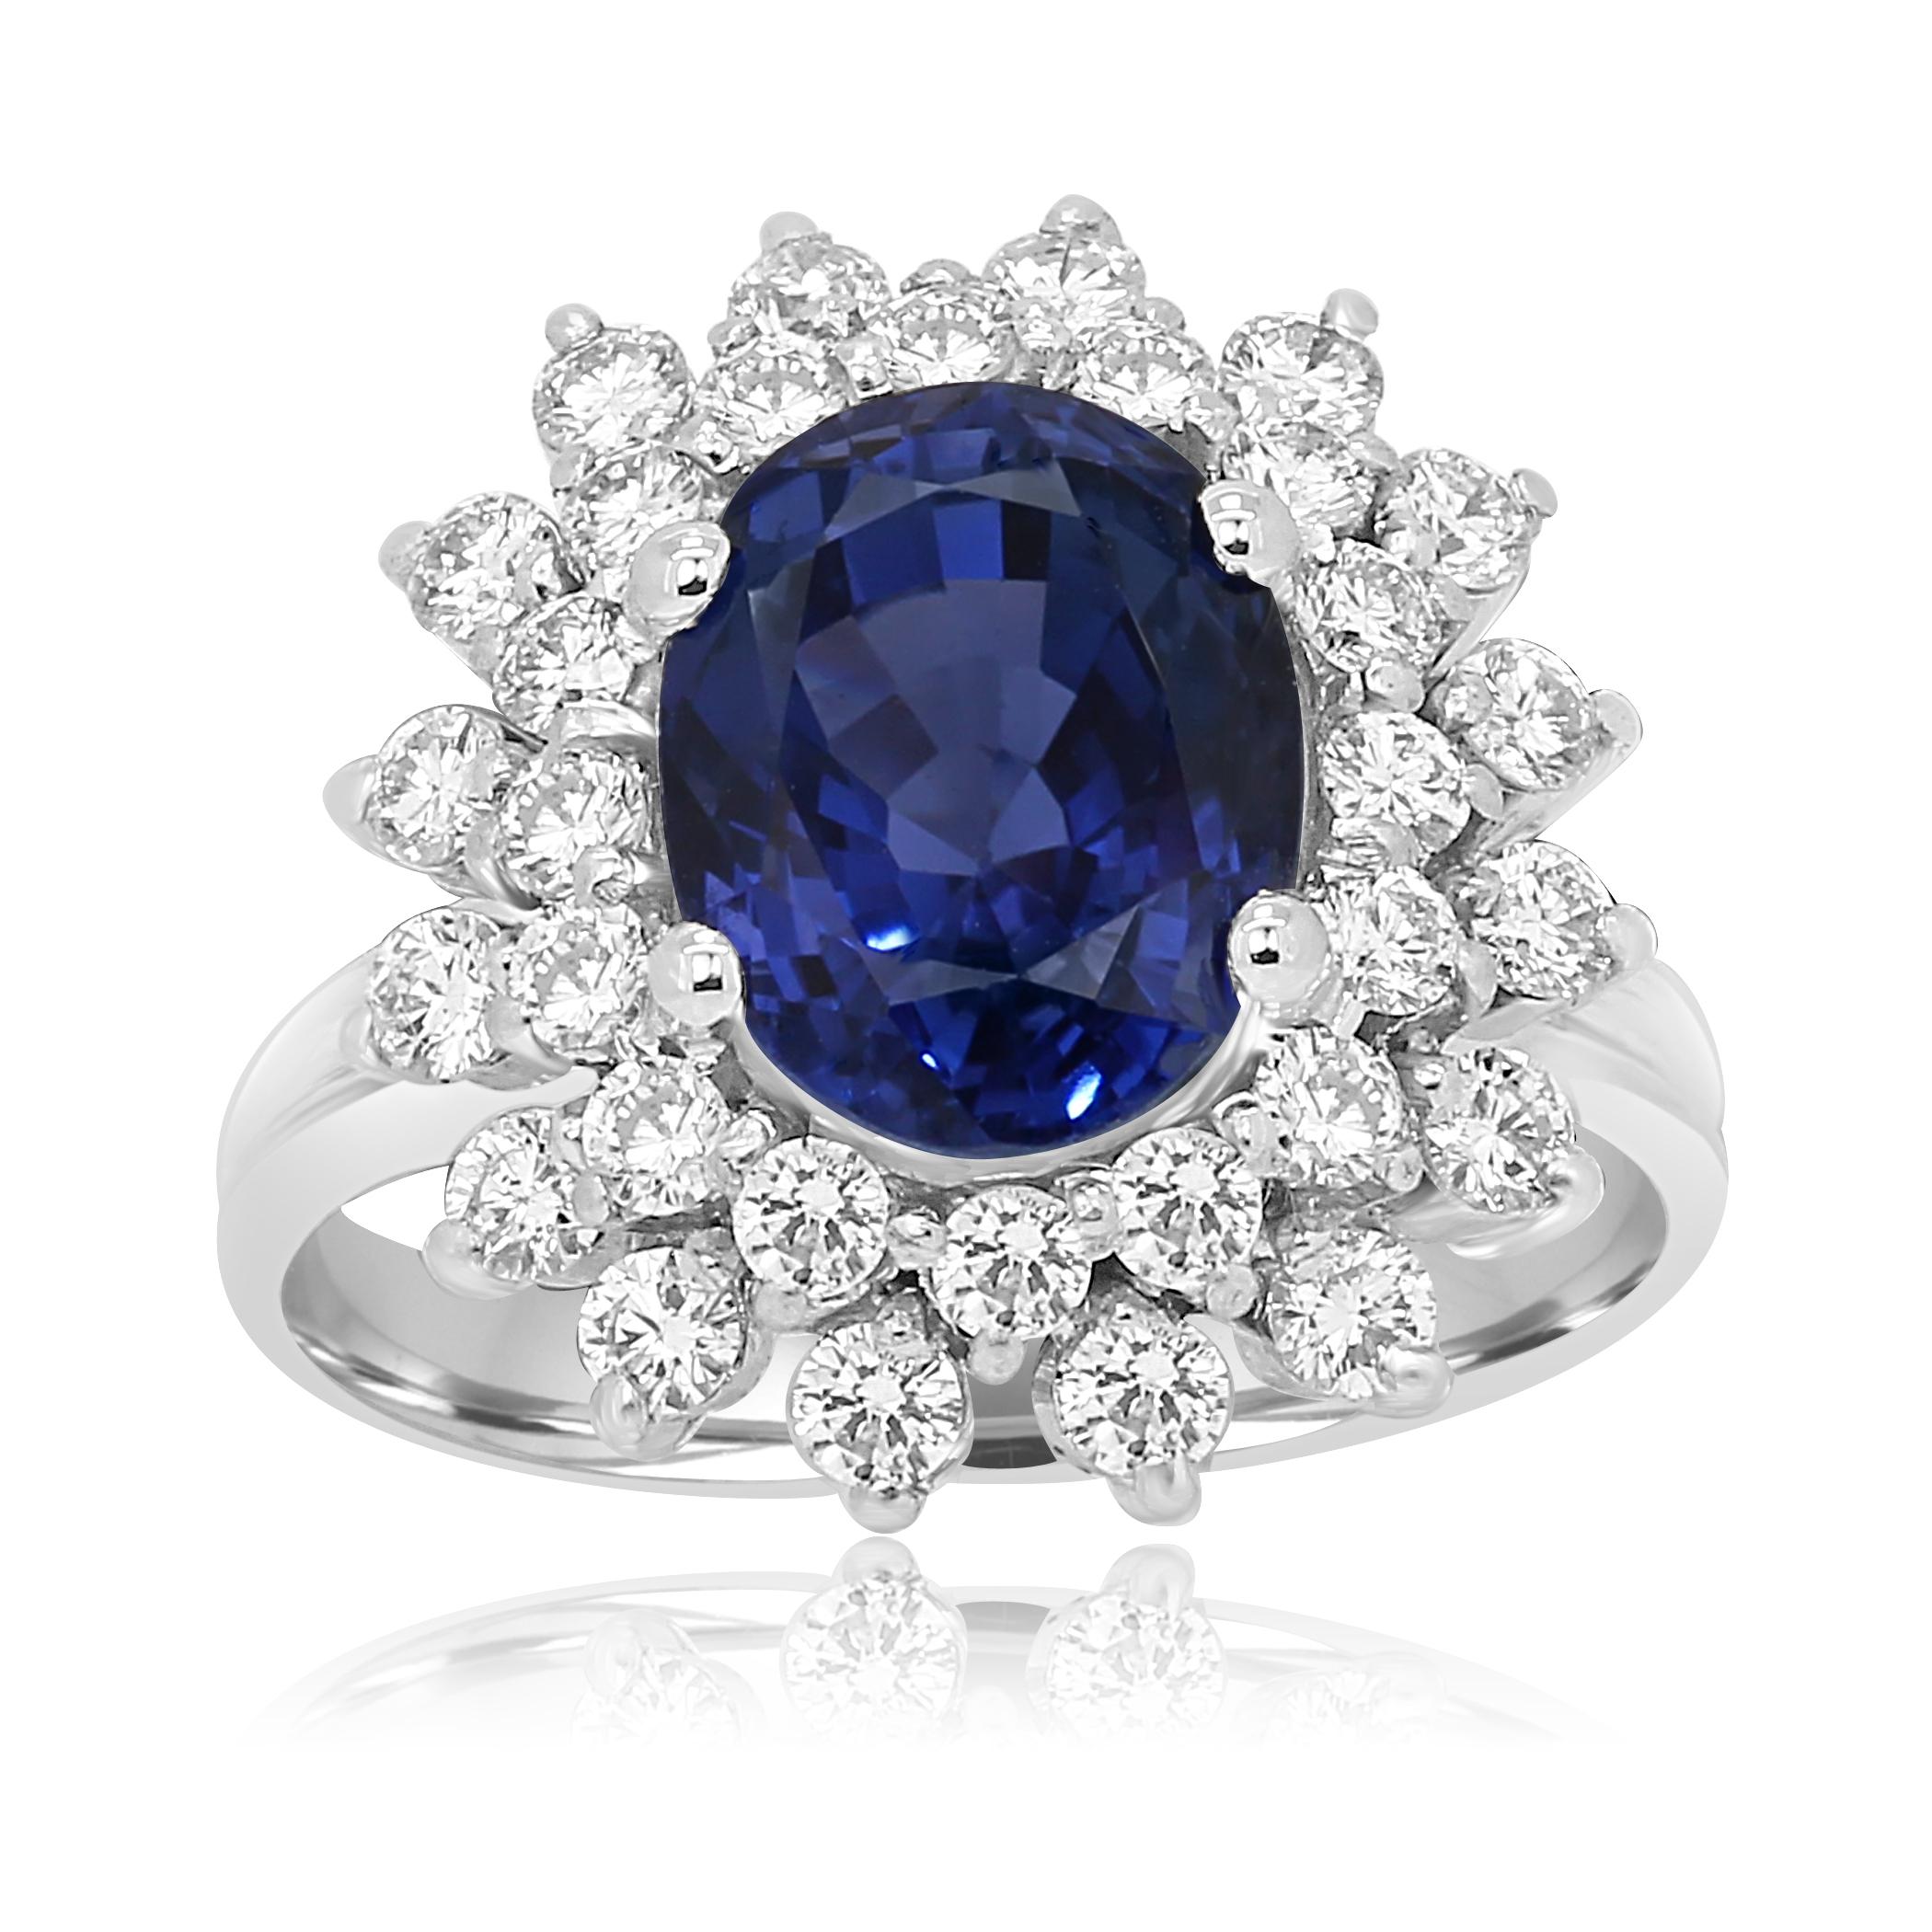 Stunning GIA Certified No Heat 6.19 Carat Ceylon Sapphire Encircled in a Double Halo of White Round Diamonds 1.20 Carat Handset in 18K White Gold Classic Ring.

MADE IN USA
Center Sapphire Weight 6.19 Carat
Total  Weight 7.39 Carat